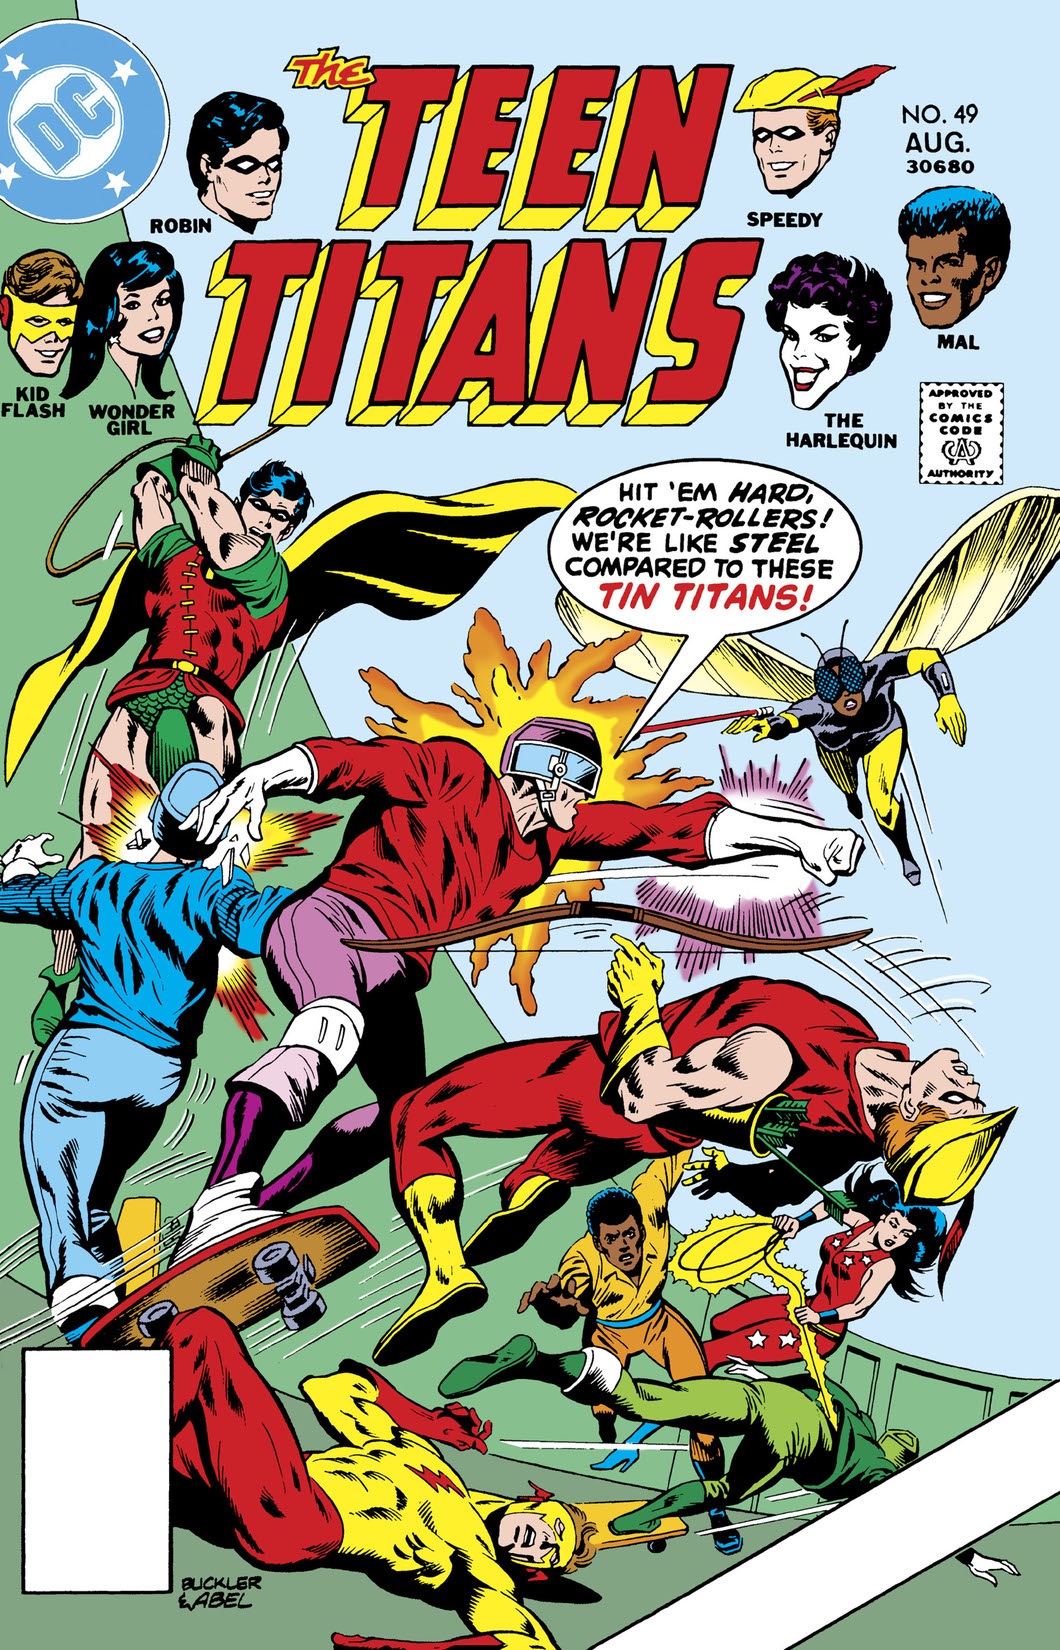 Teen Titans (1966-) #49 preview images